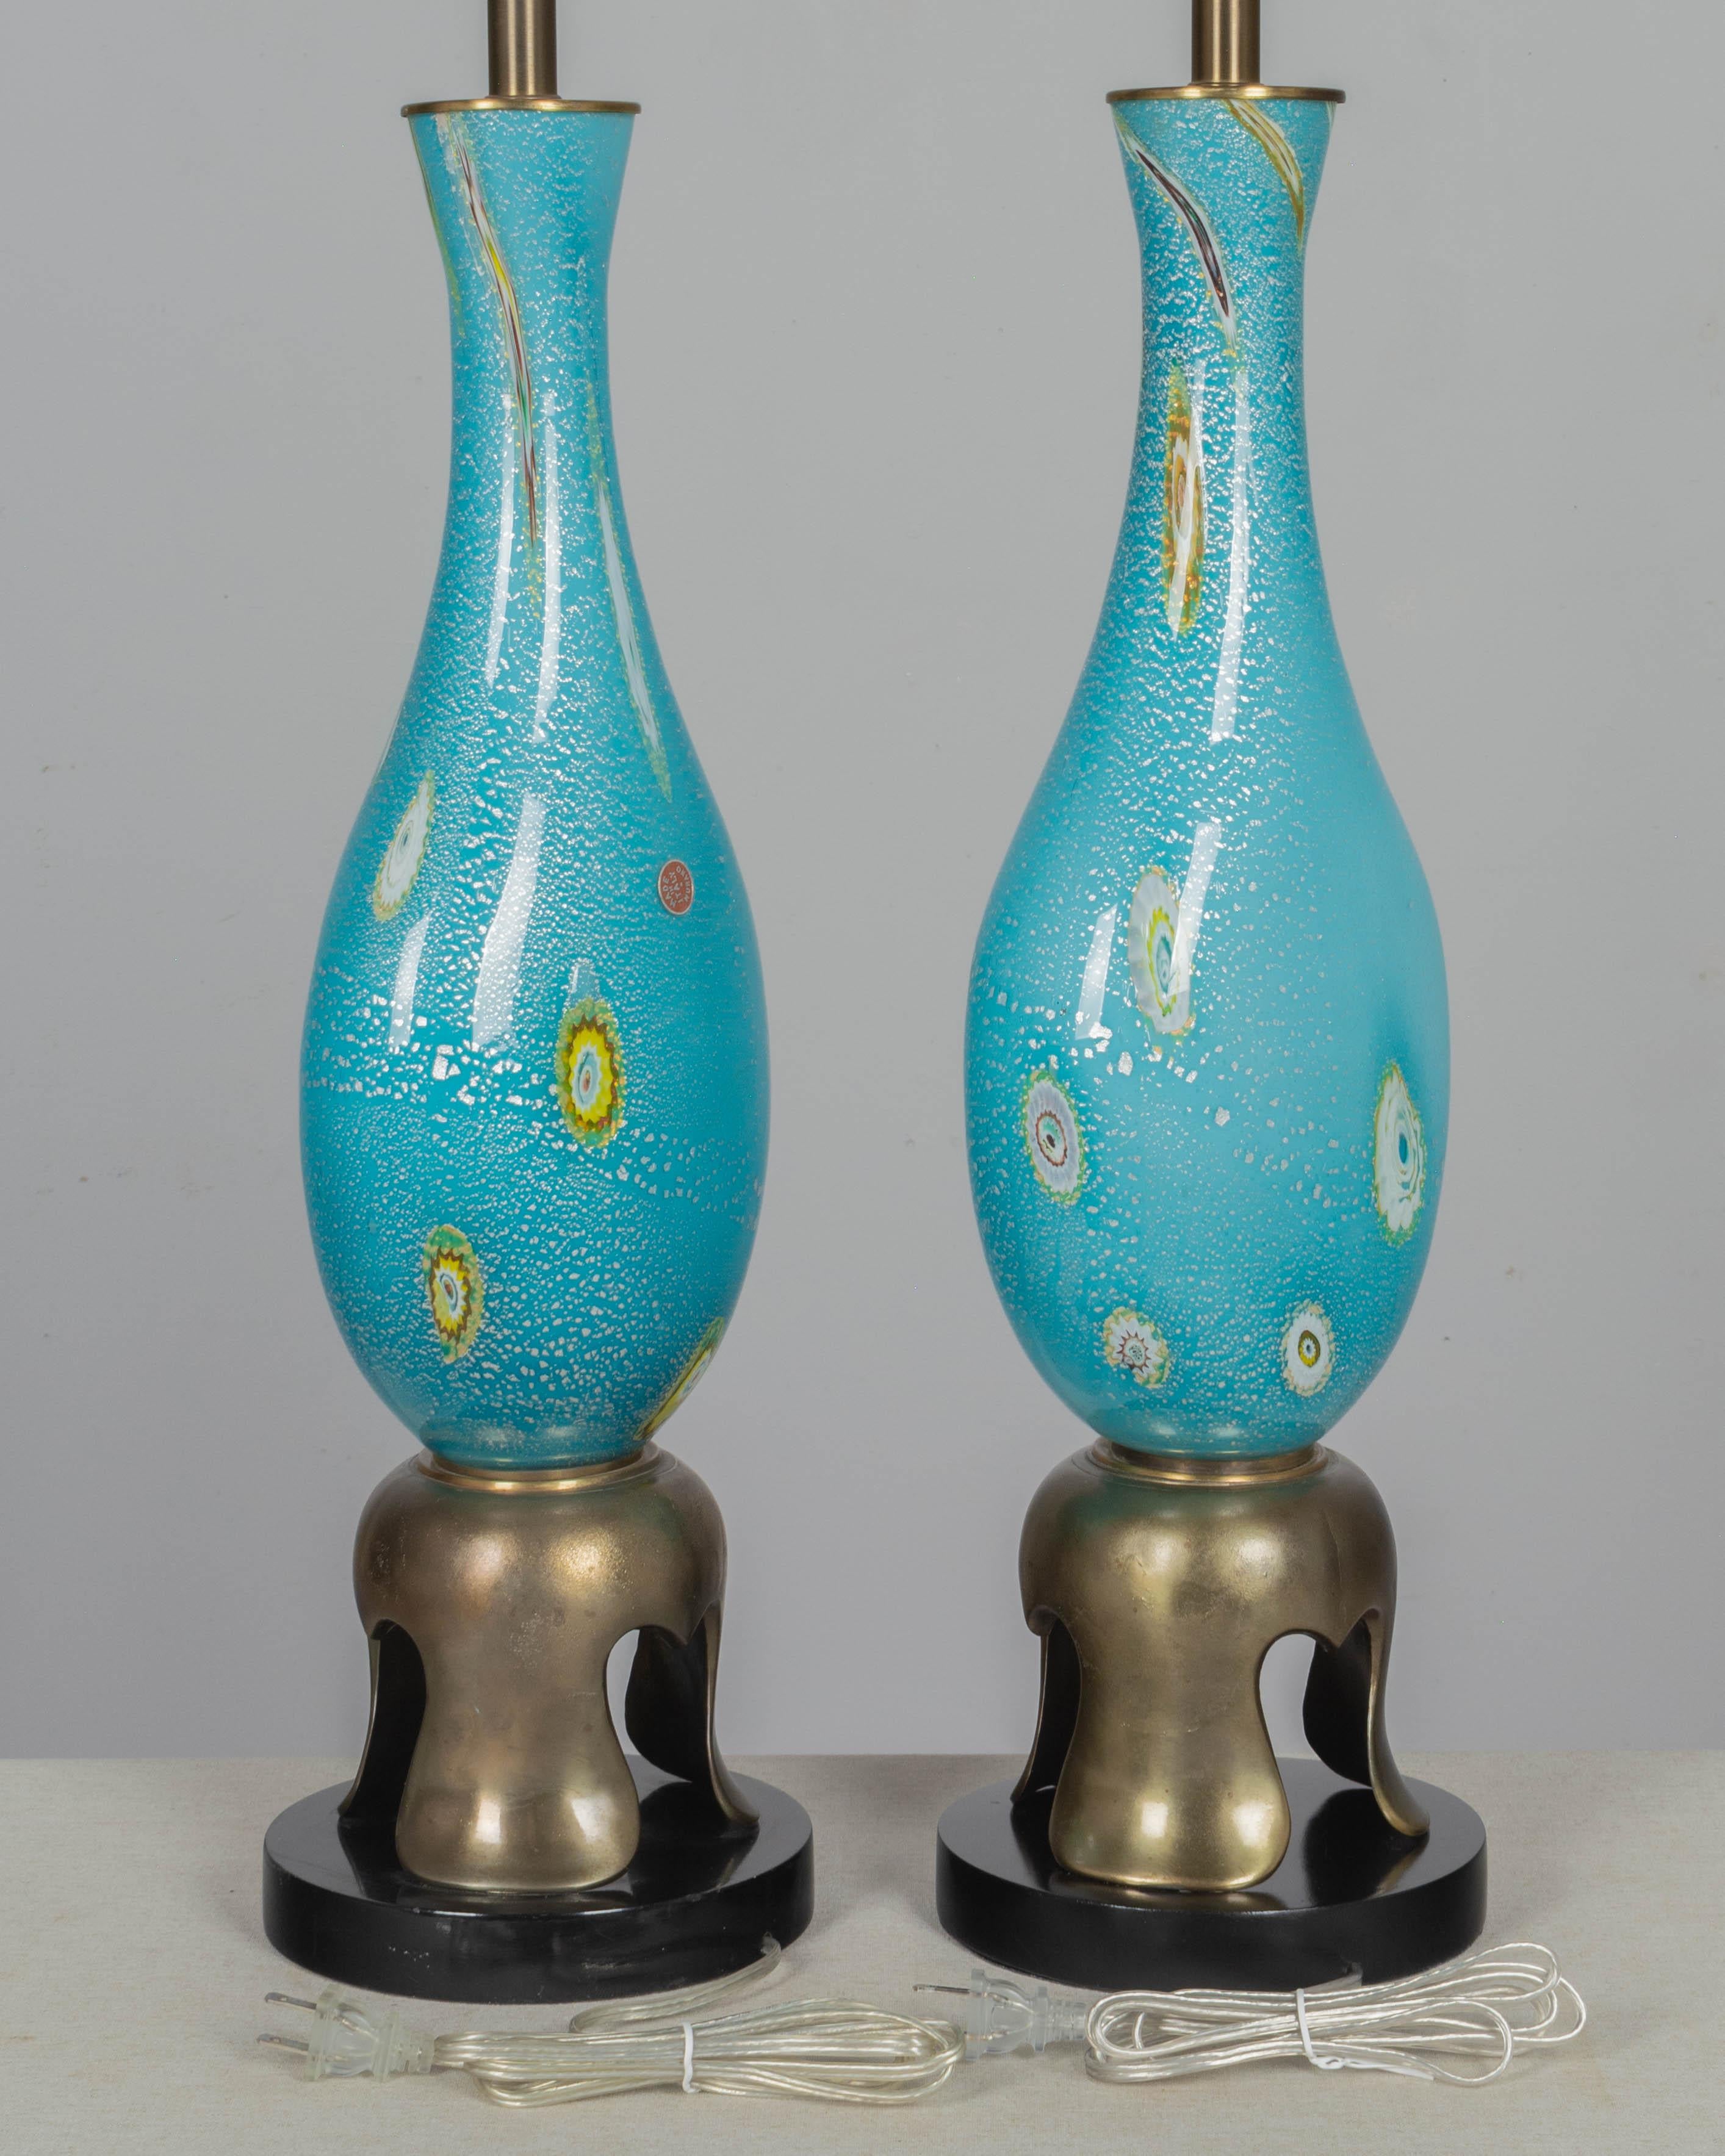 Murano Glass Barovier & Toso Lamp Pair In Good Condition For Sale In Winter Park, FL